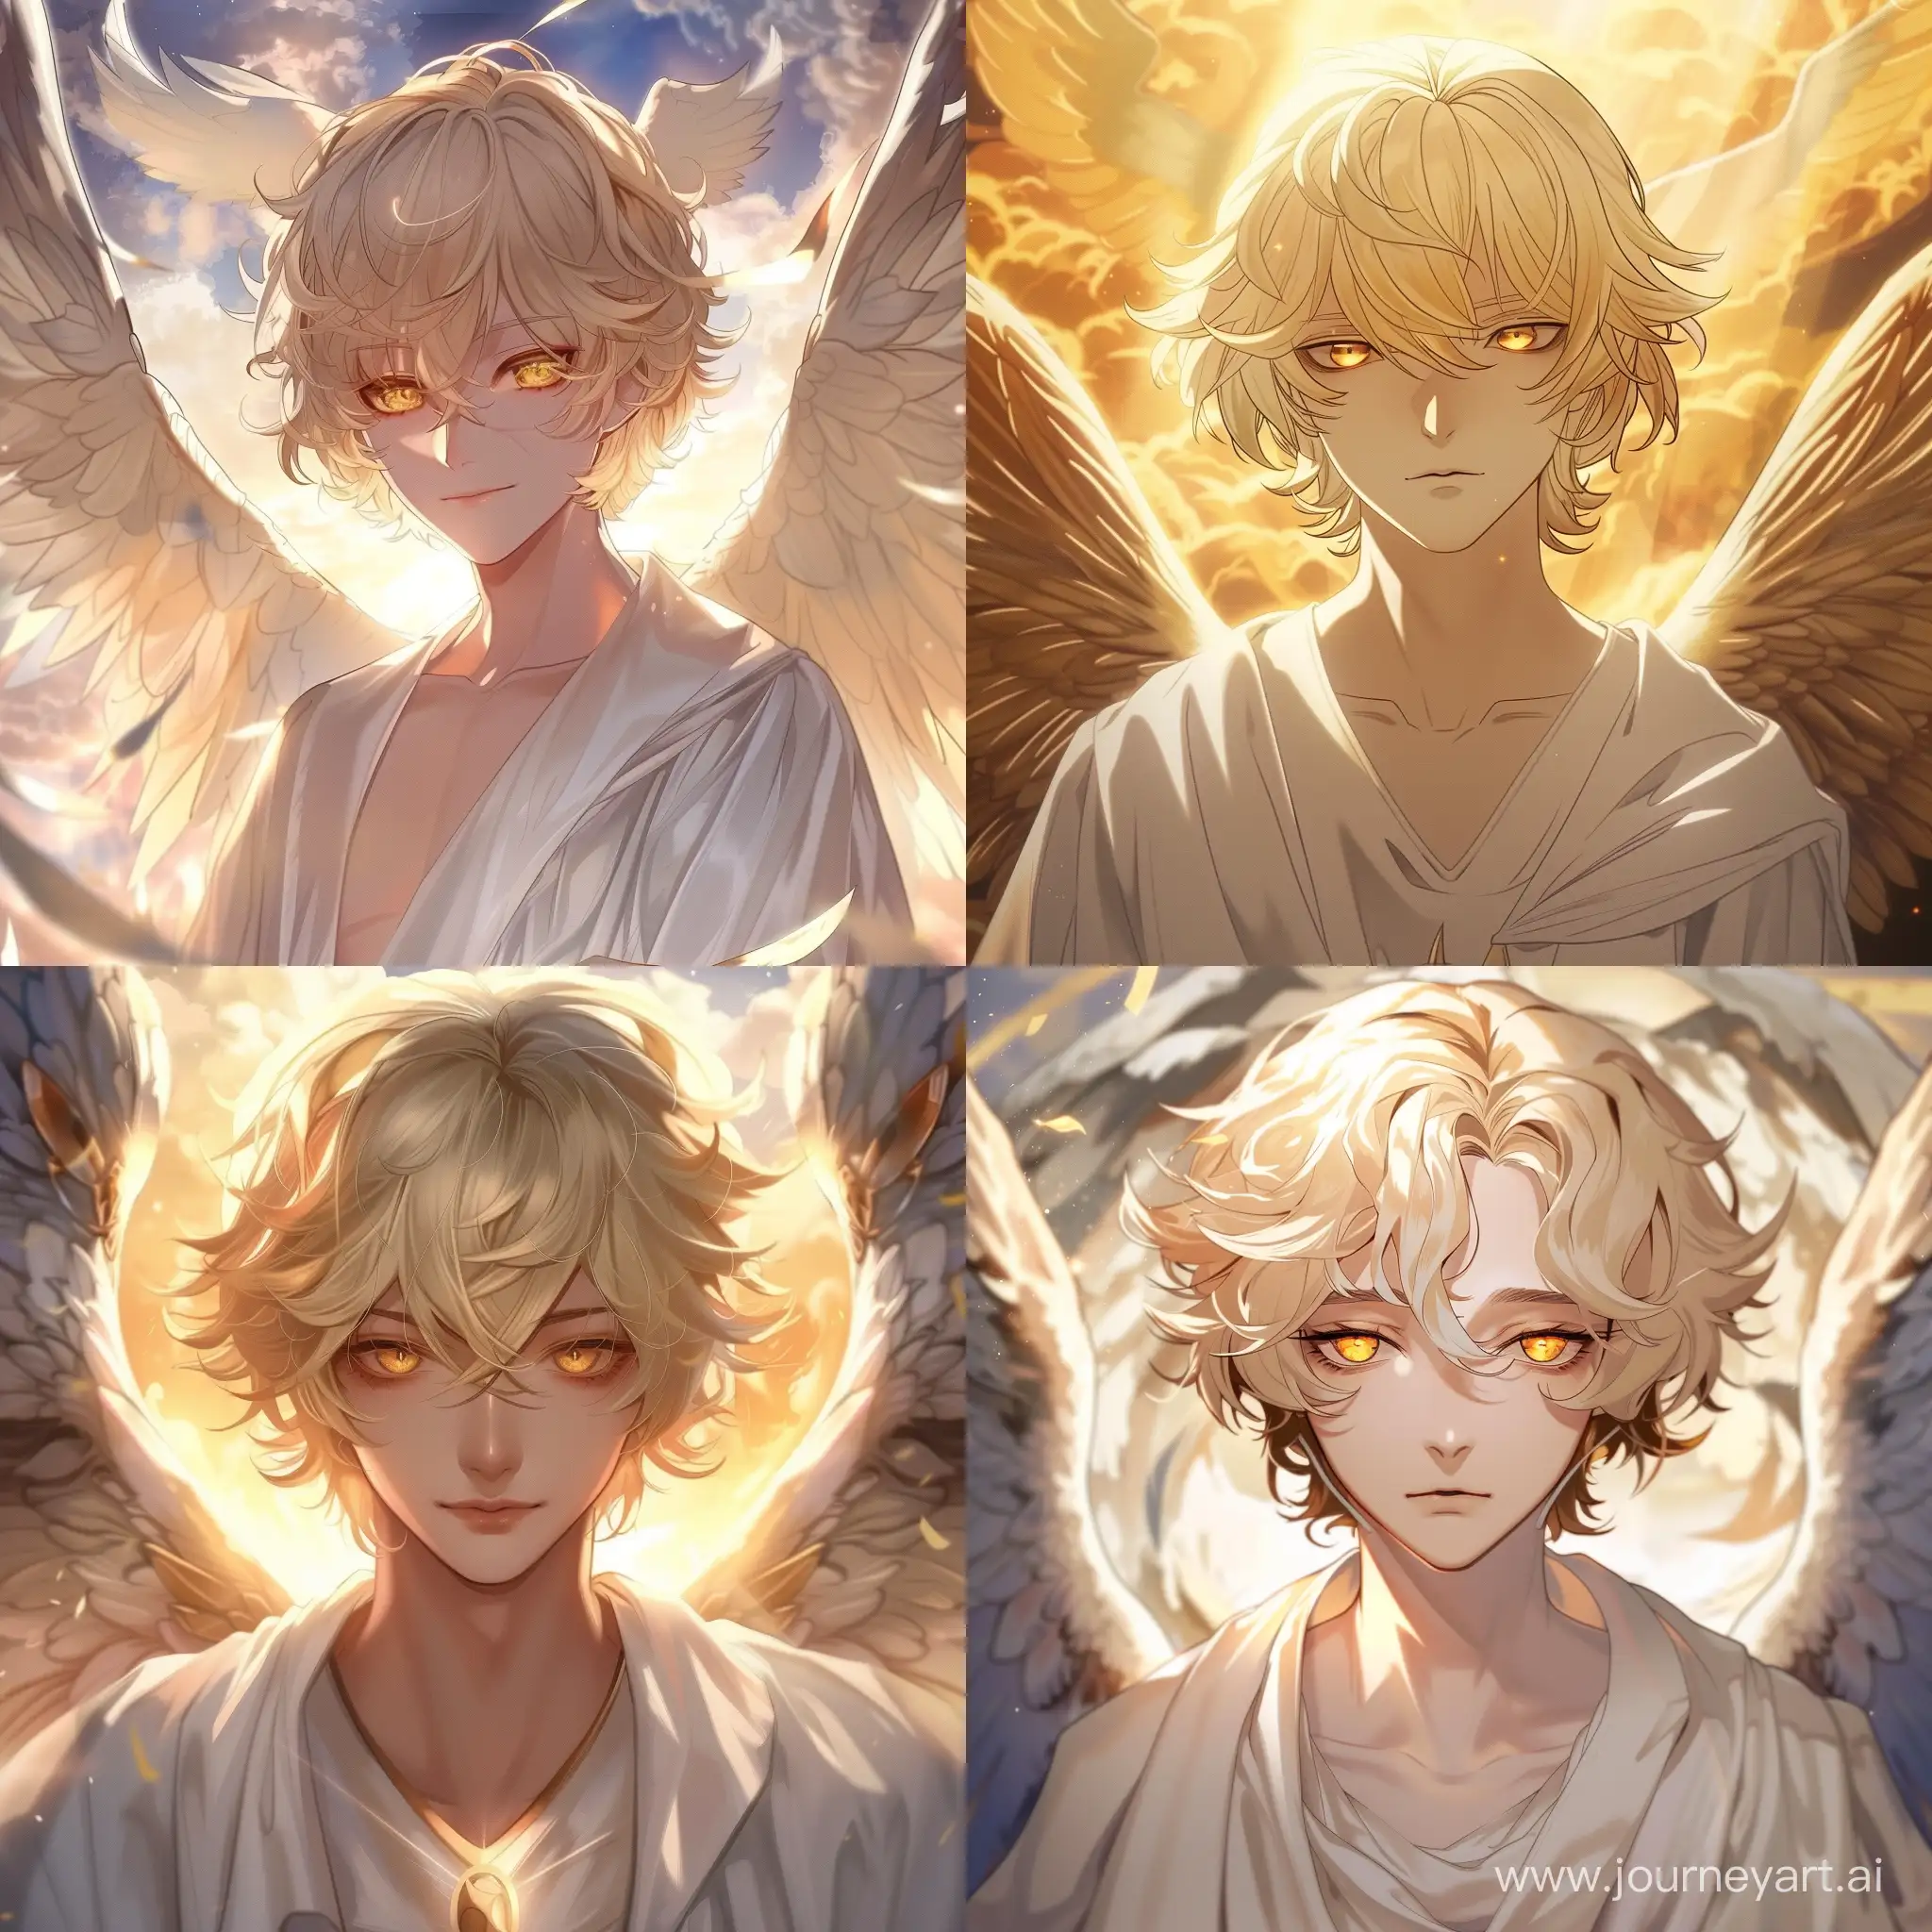 Heavenly-Archangel-Lucifer-Anime-Style-Portrait-with-Short-Blonde-Hair-and-Golden-Eyes